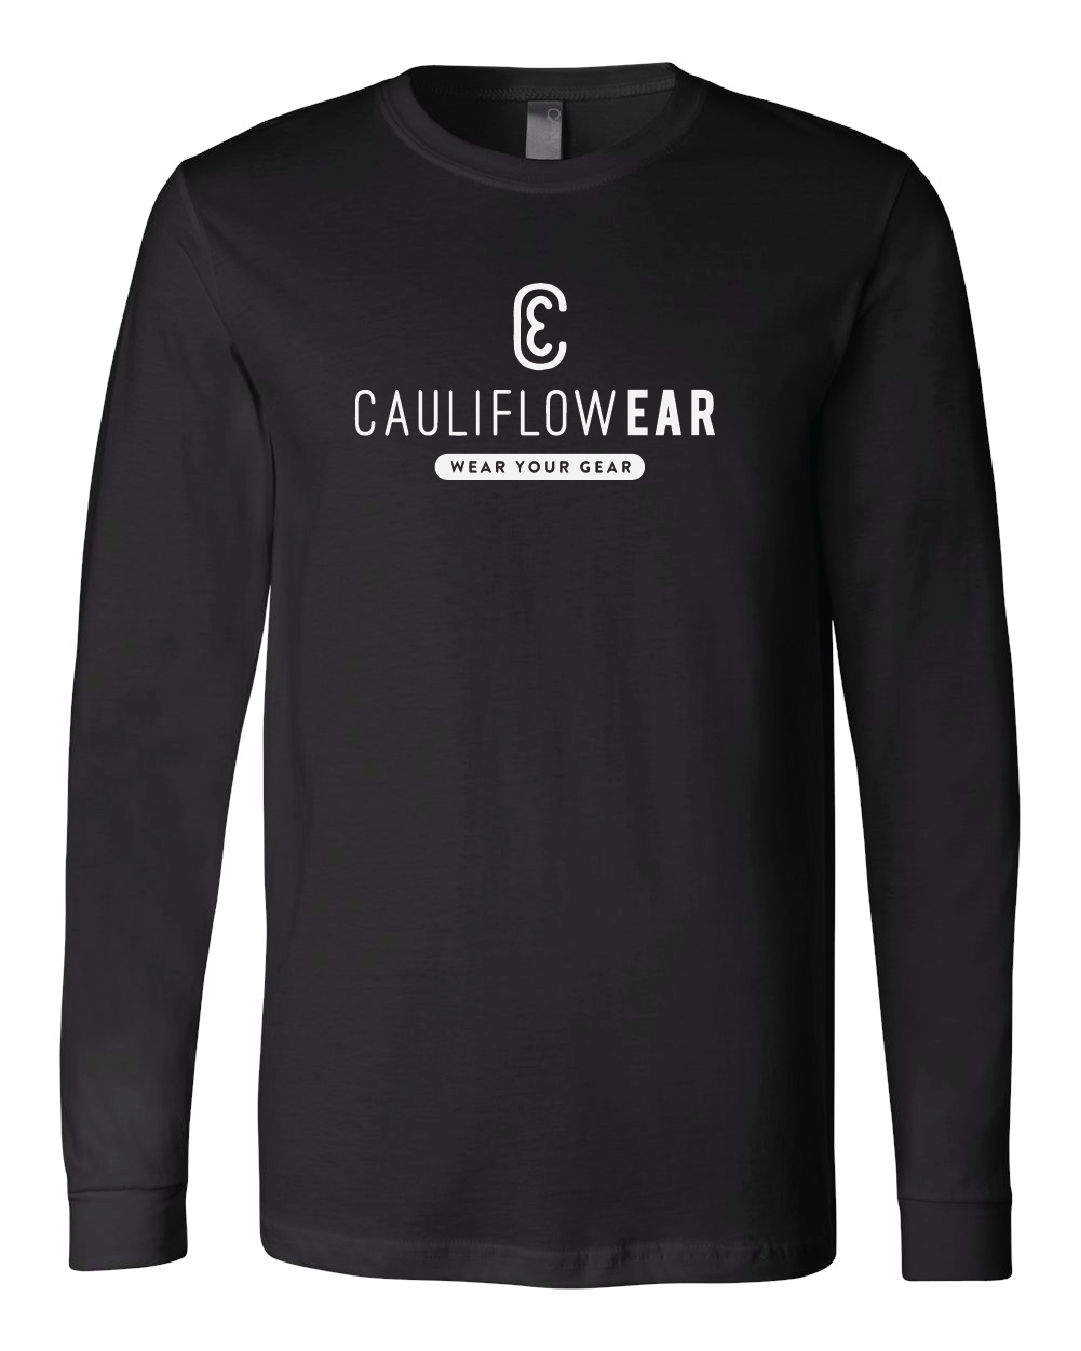 Wear Your Gear (Soft Style Short Sleeve and Long Sleeve)